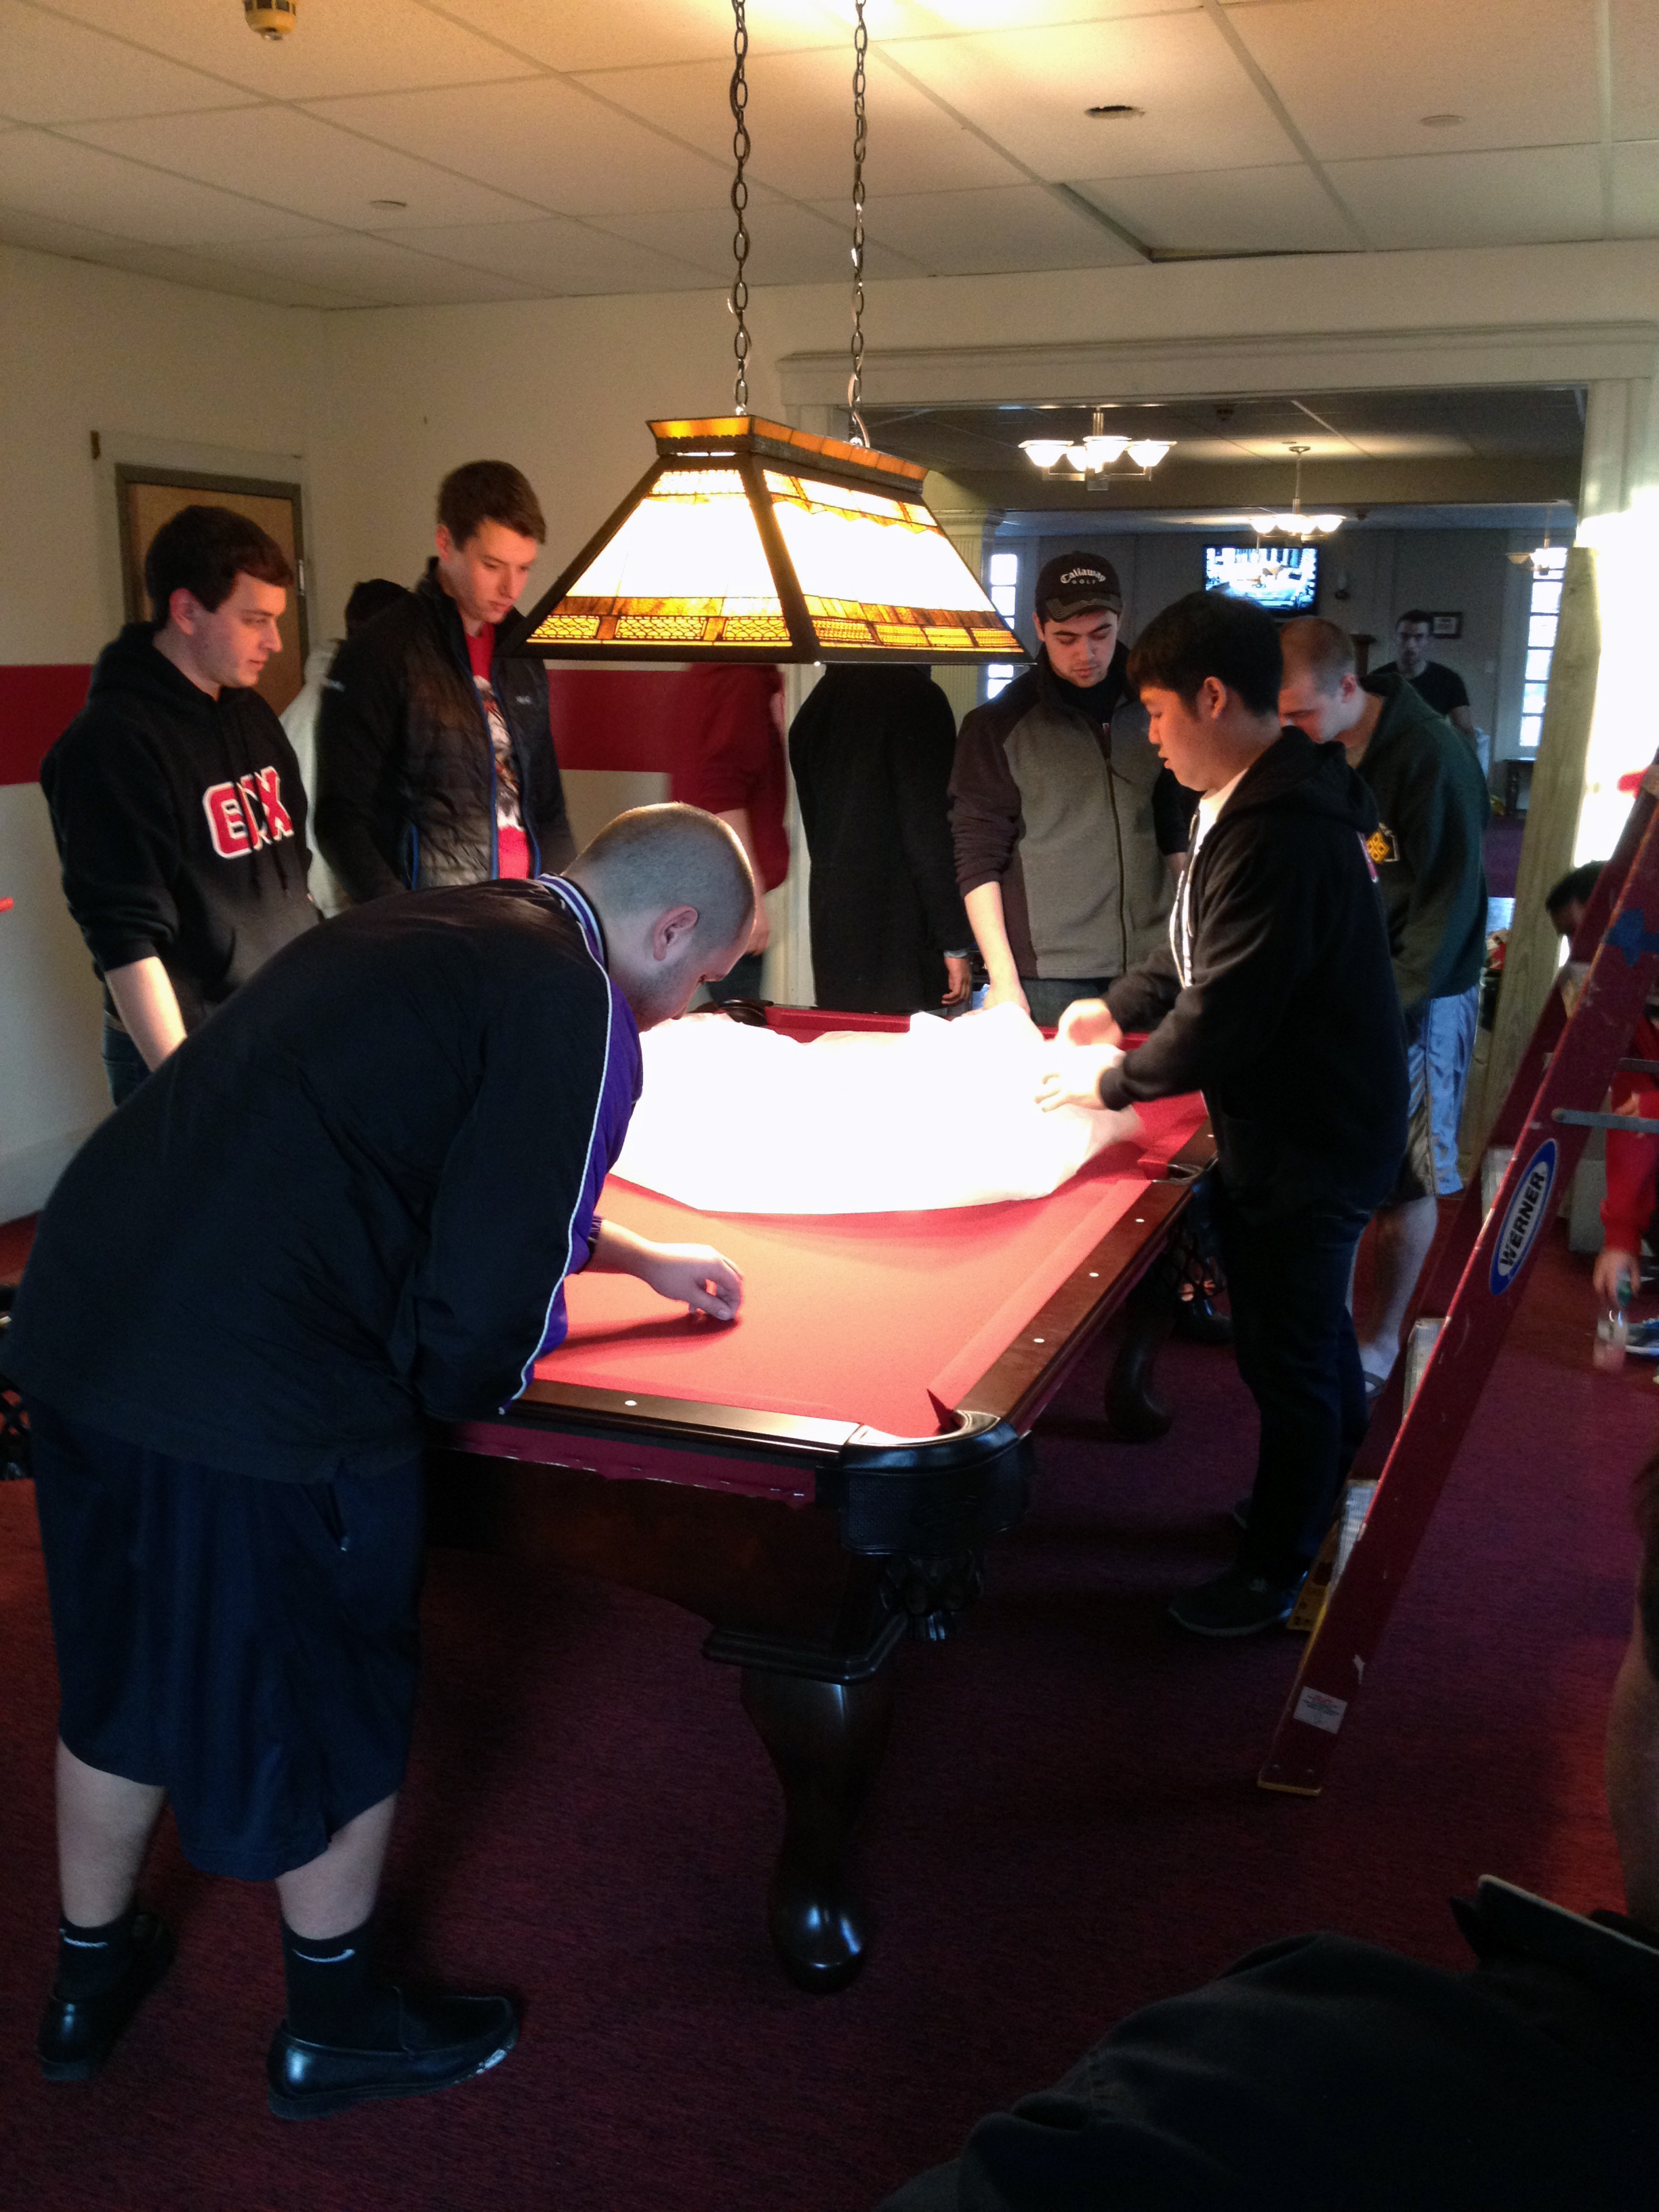  2013 Alumni Work Weekend - Pool Room Project cleaning the table before the first game 